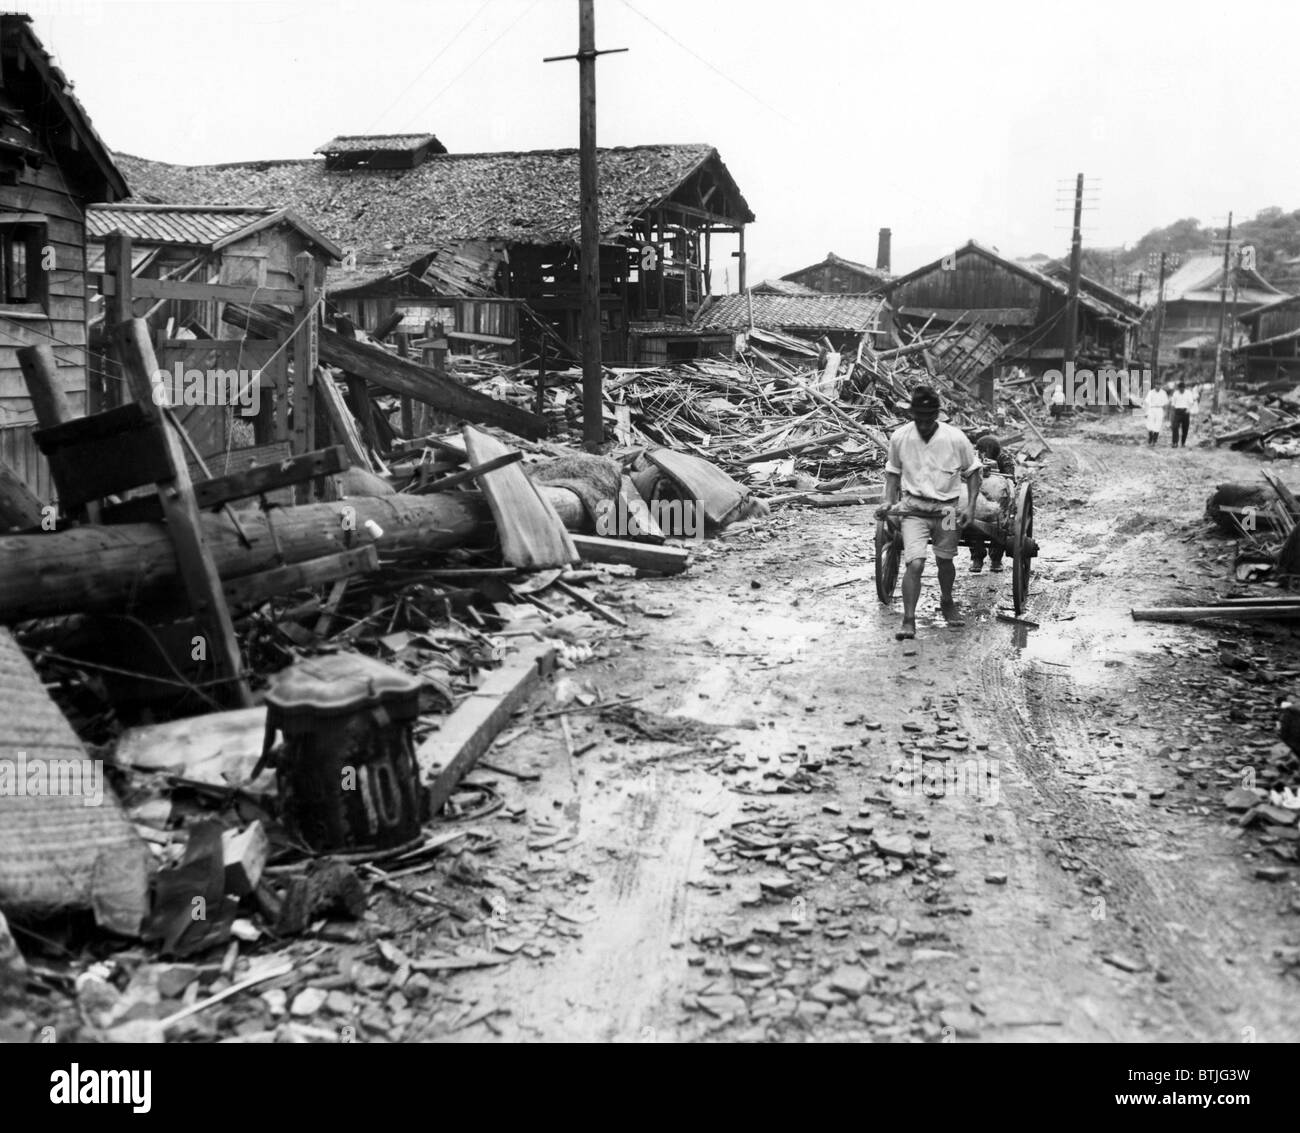 World War II, Atomic bombing aftermath in suburb four miles outside of center of Nagasaki, Japan, September 13, 1945. CSU Archiv Stock Photo